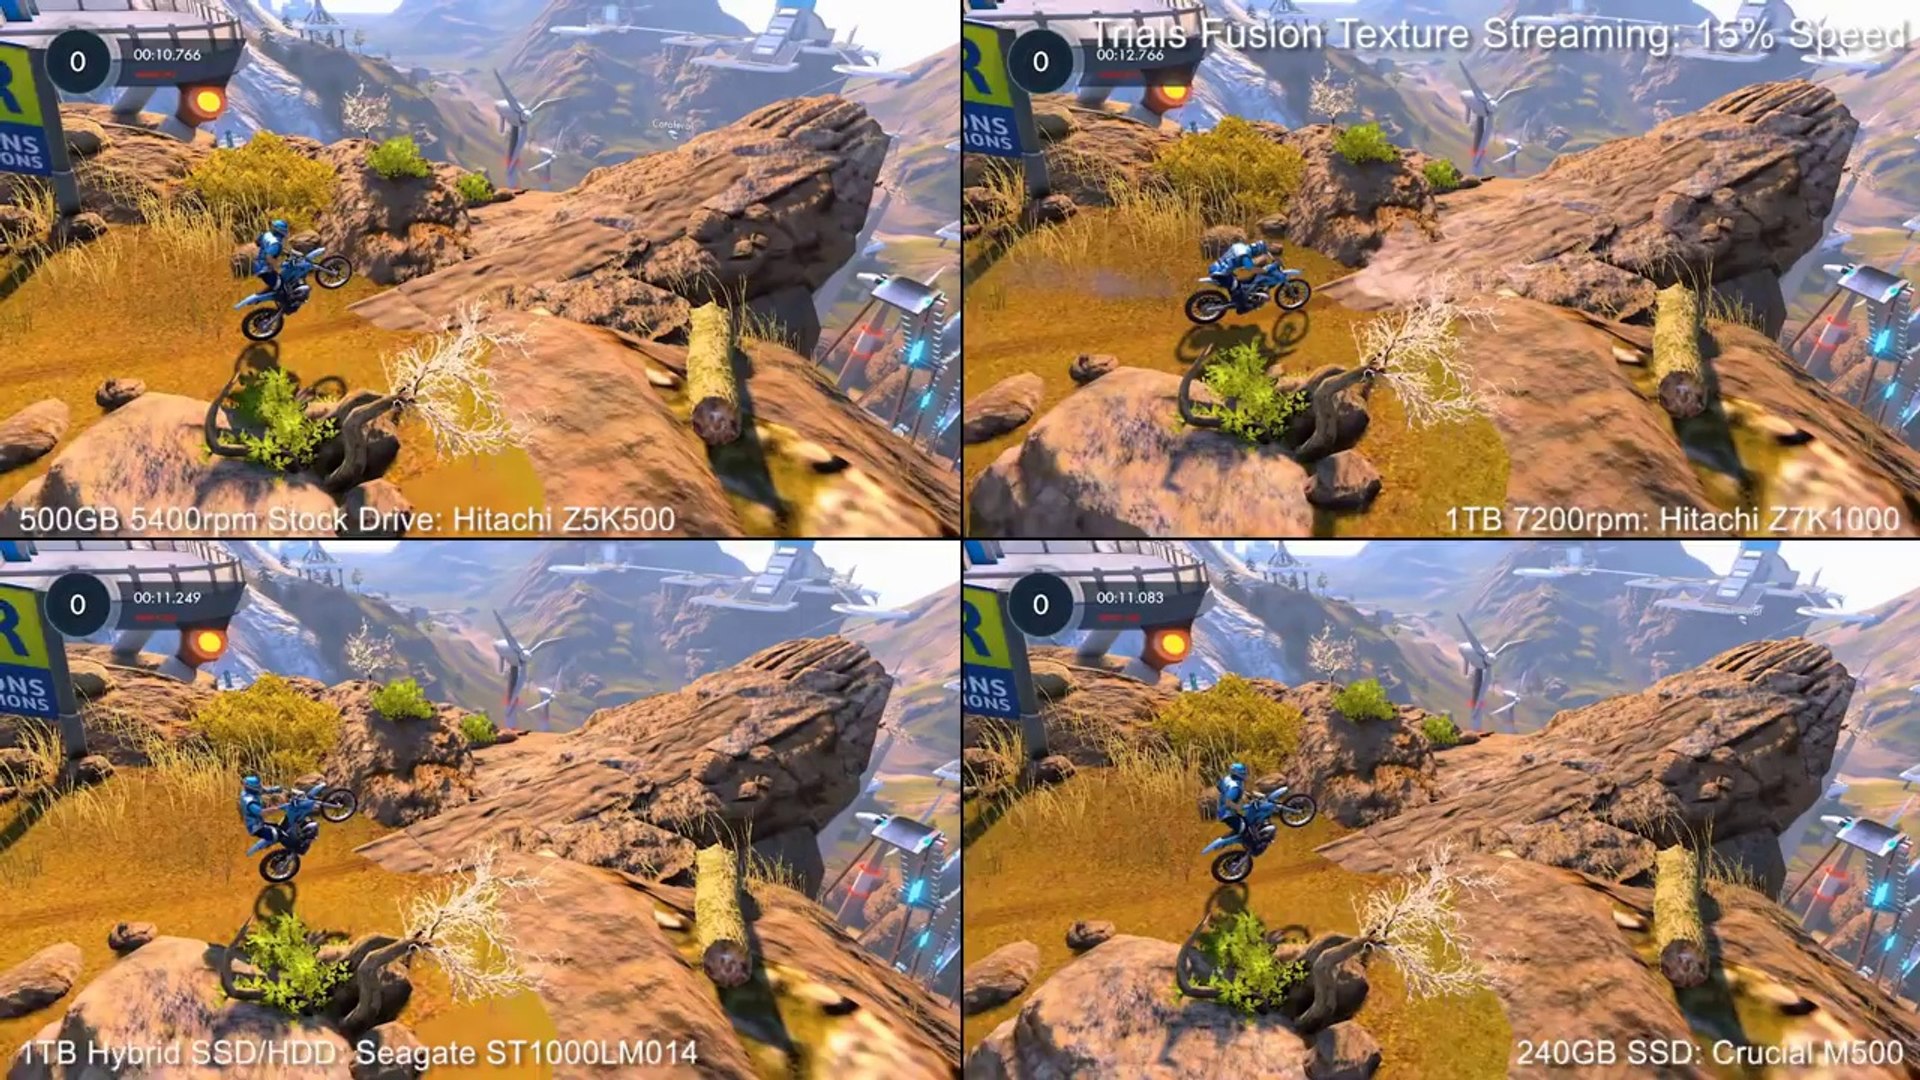 grå Slibende Hospital PS4 - Hard Drive SSD Upgrade Tests Trials Fusion Texture Streaming  Comparison - video Dailymotion